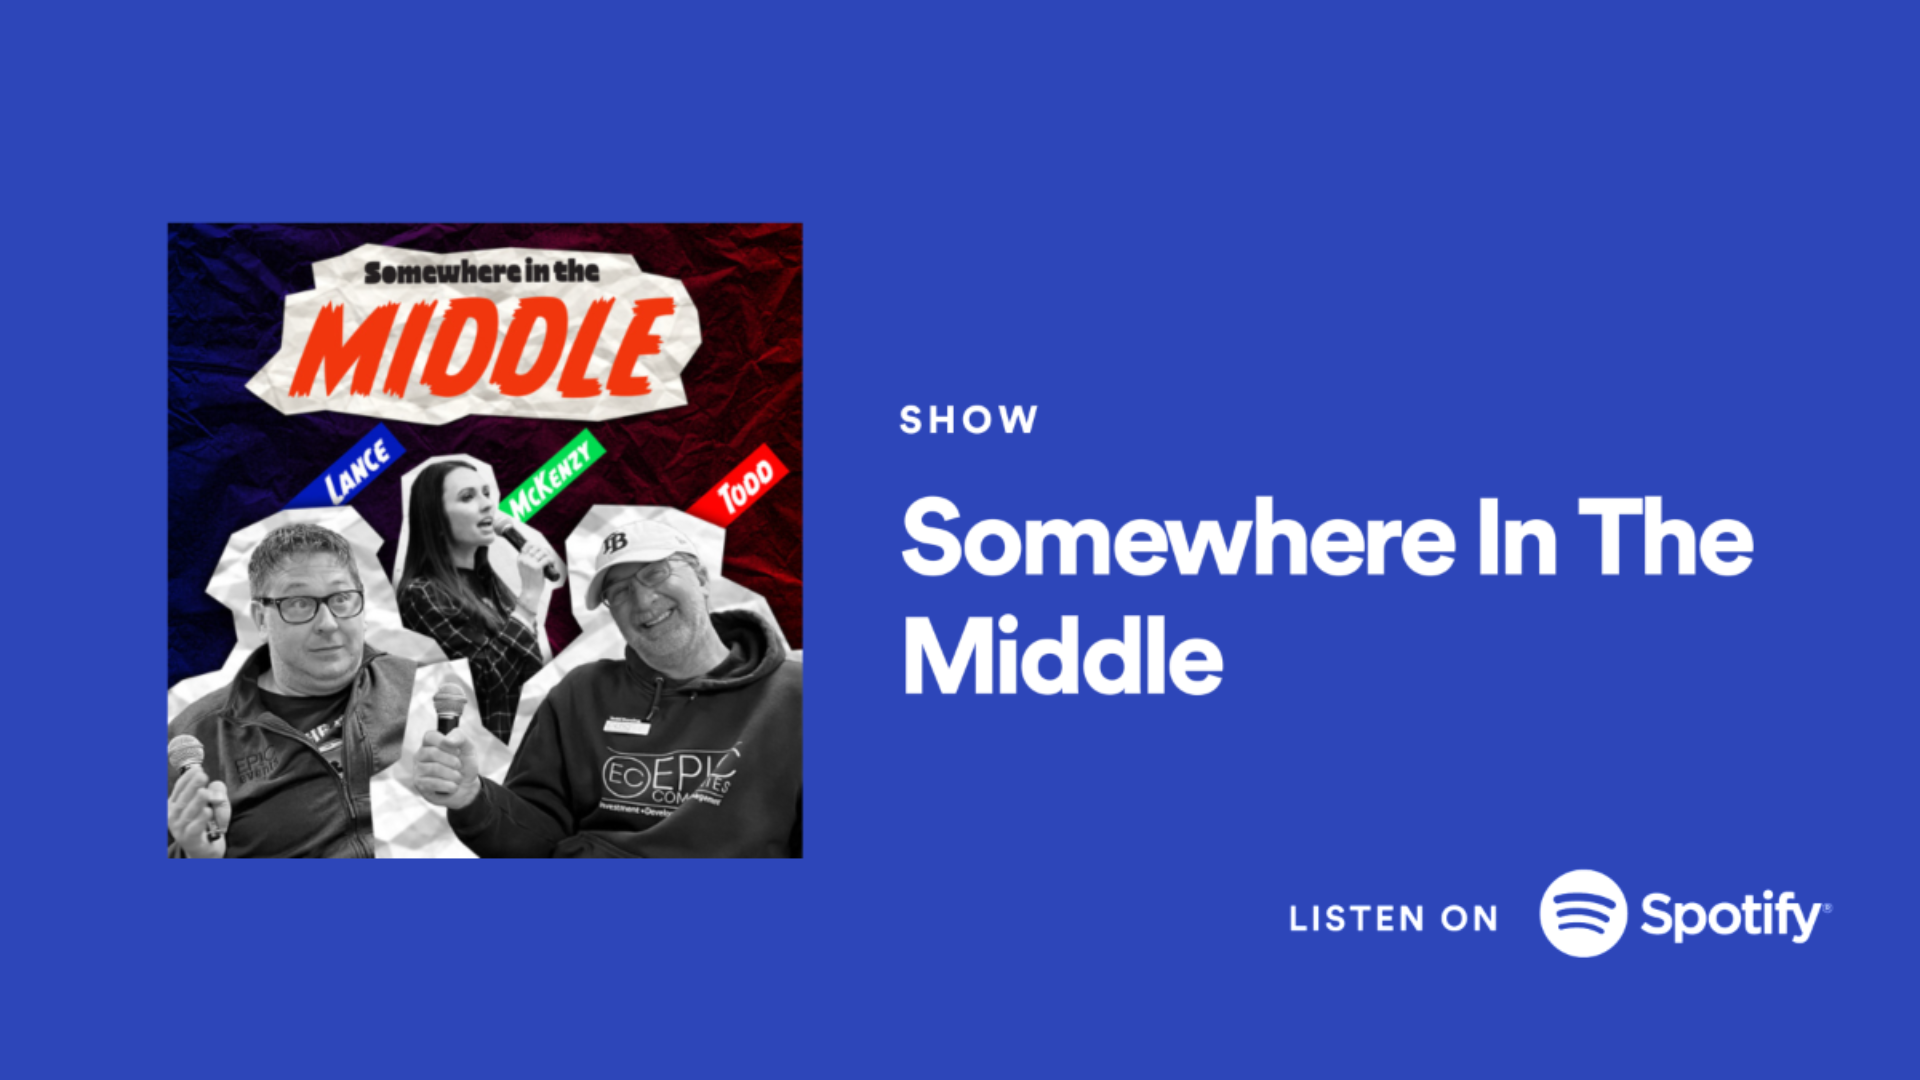 Somewhere in the middle podcast show